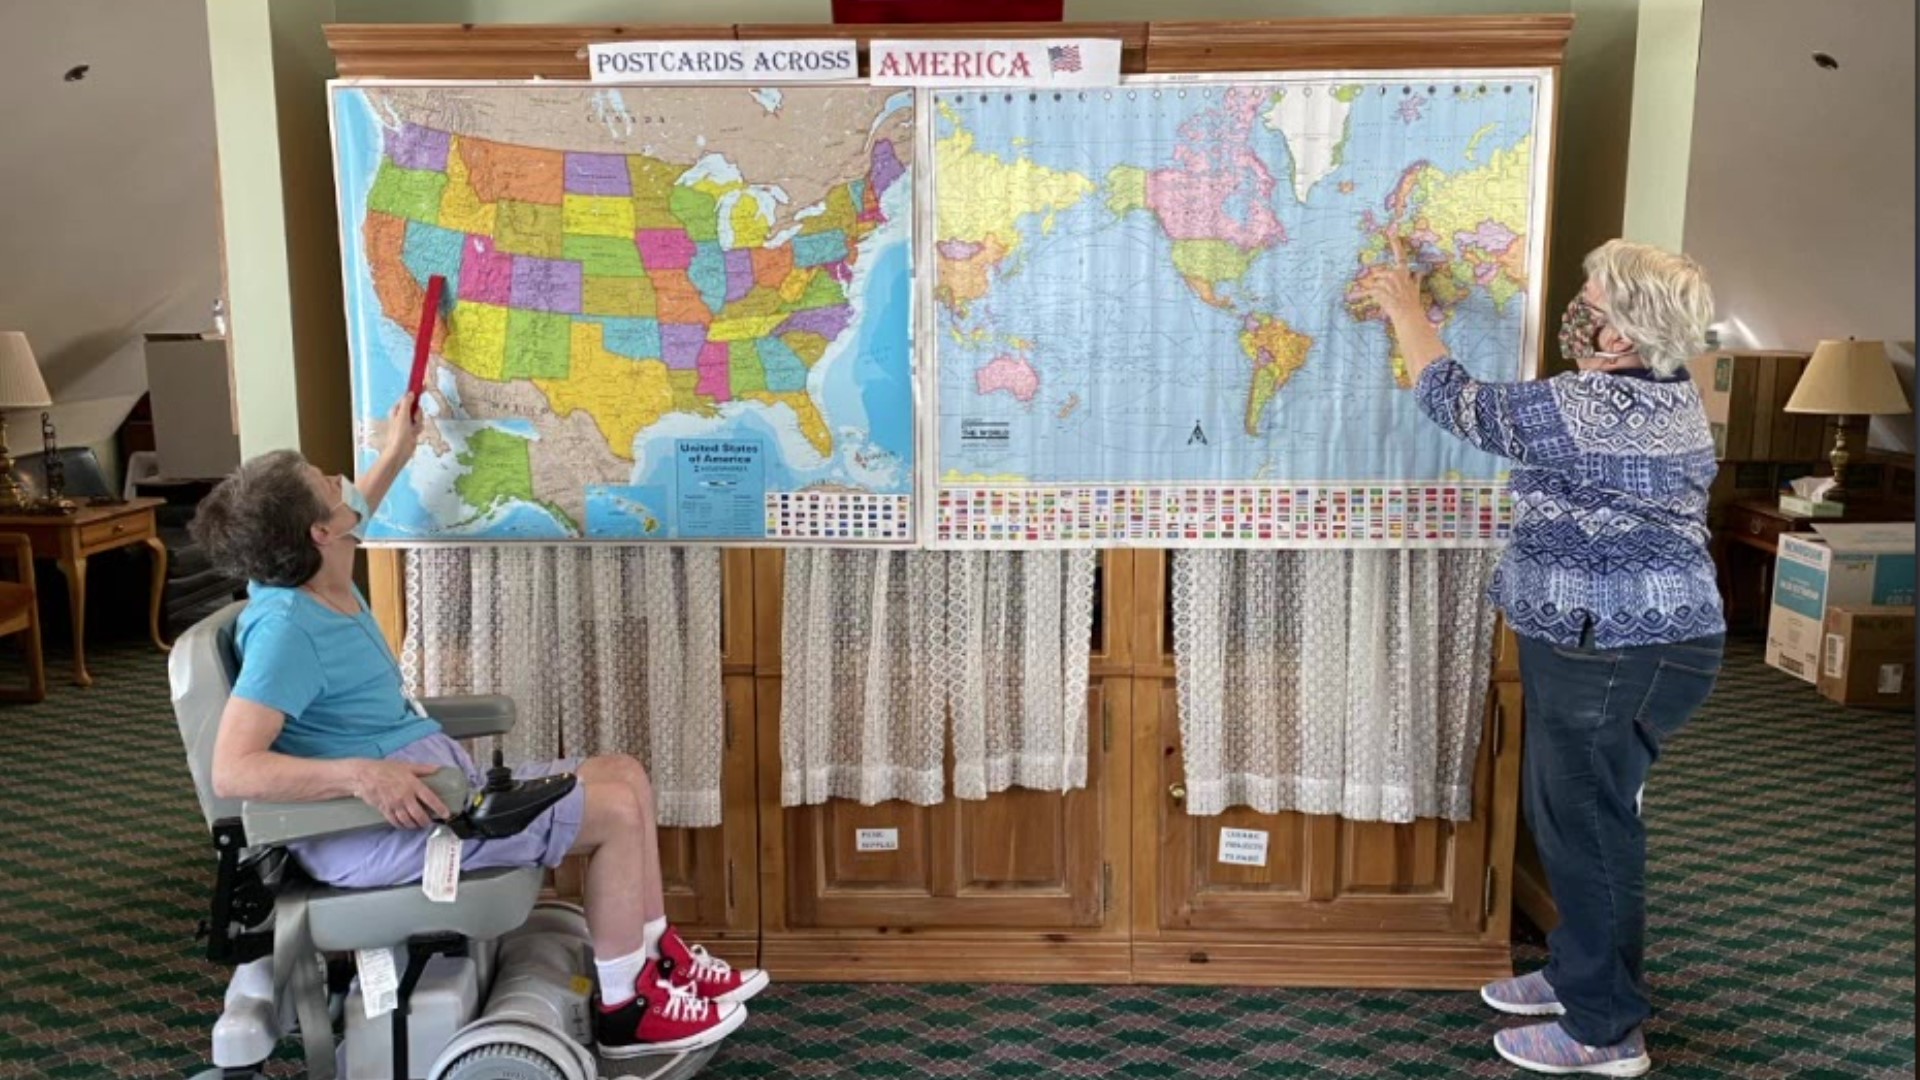 The activities director at Bethany Village Senior Living is calling her latest project to keep her residents' spirits up "Postcards Across America."